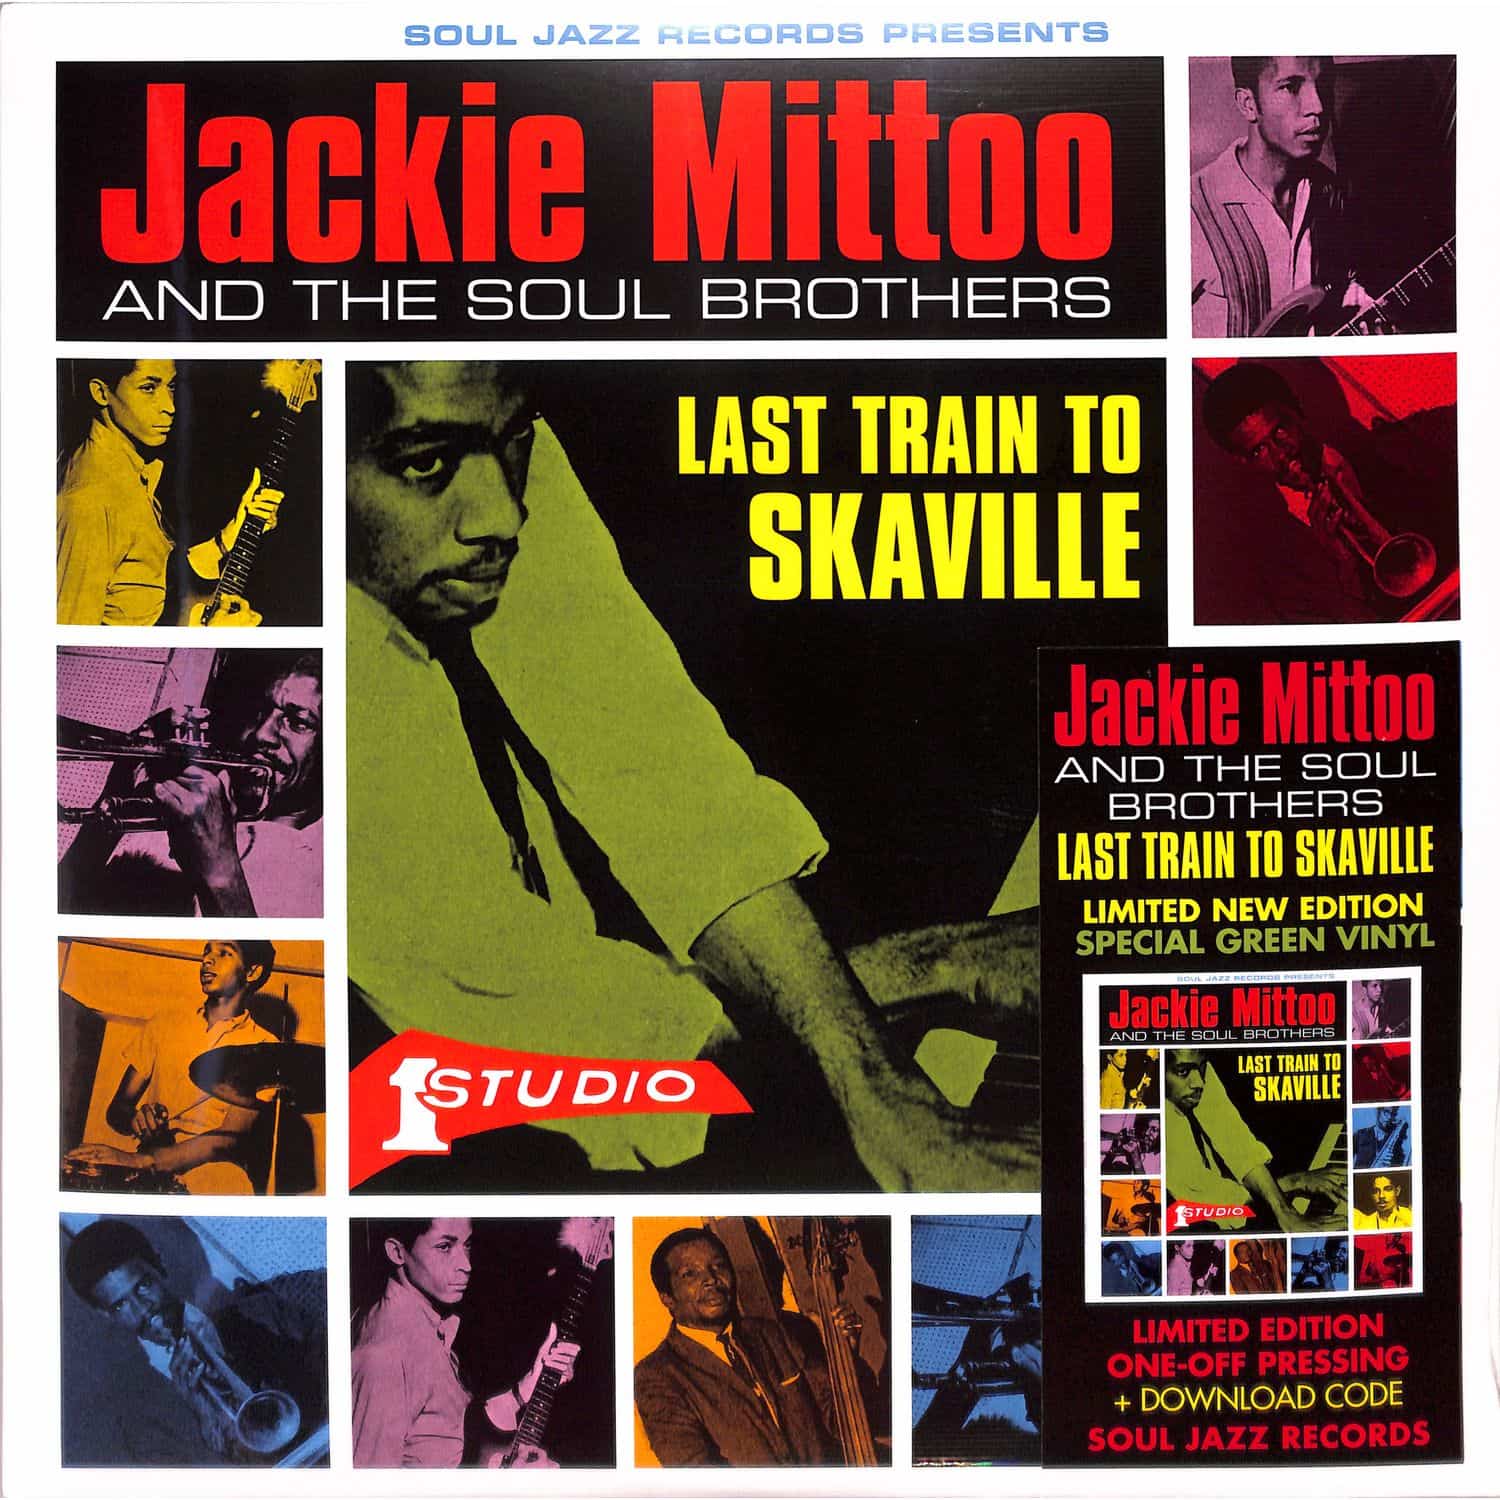 Jackie Mittoo & the Soul Brothers - LAST TRAIN TO SKAVILLE 